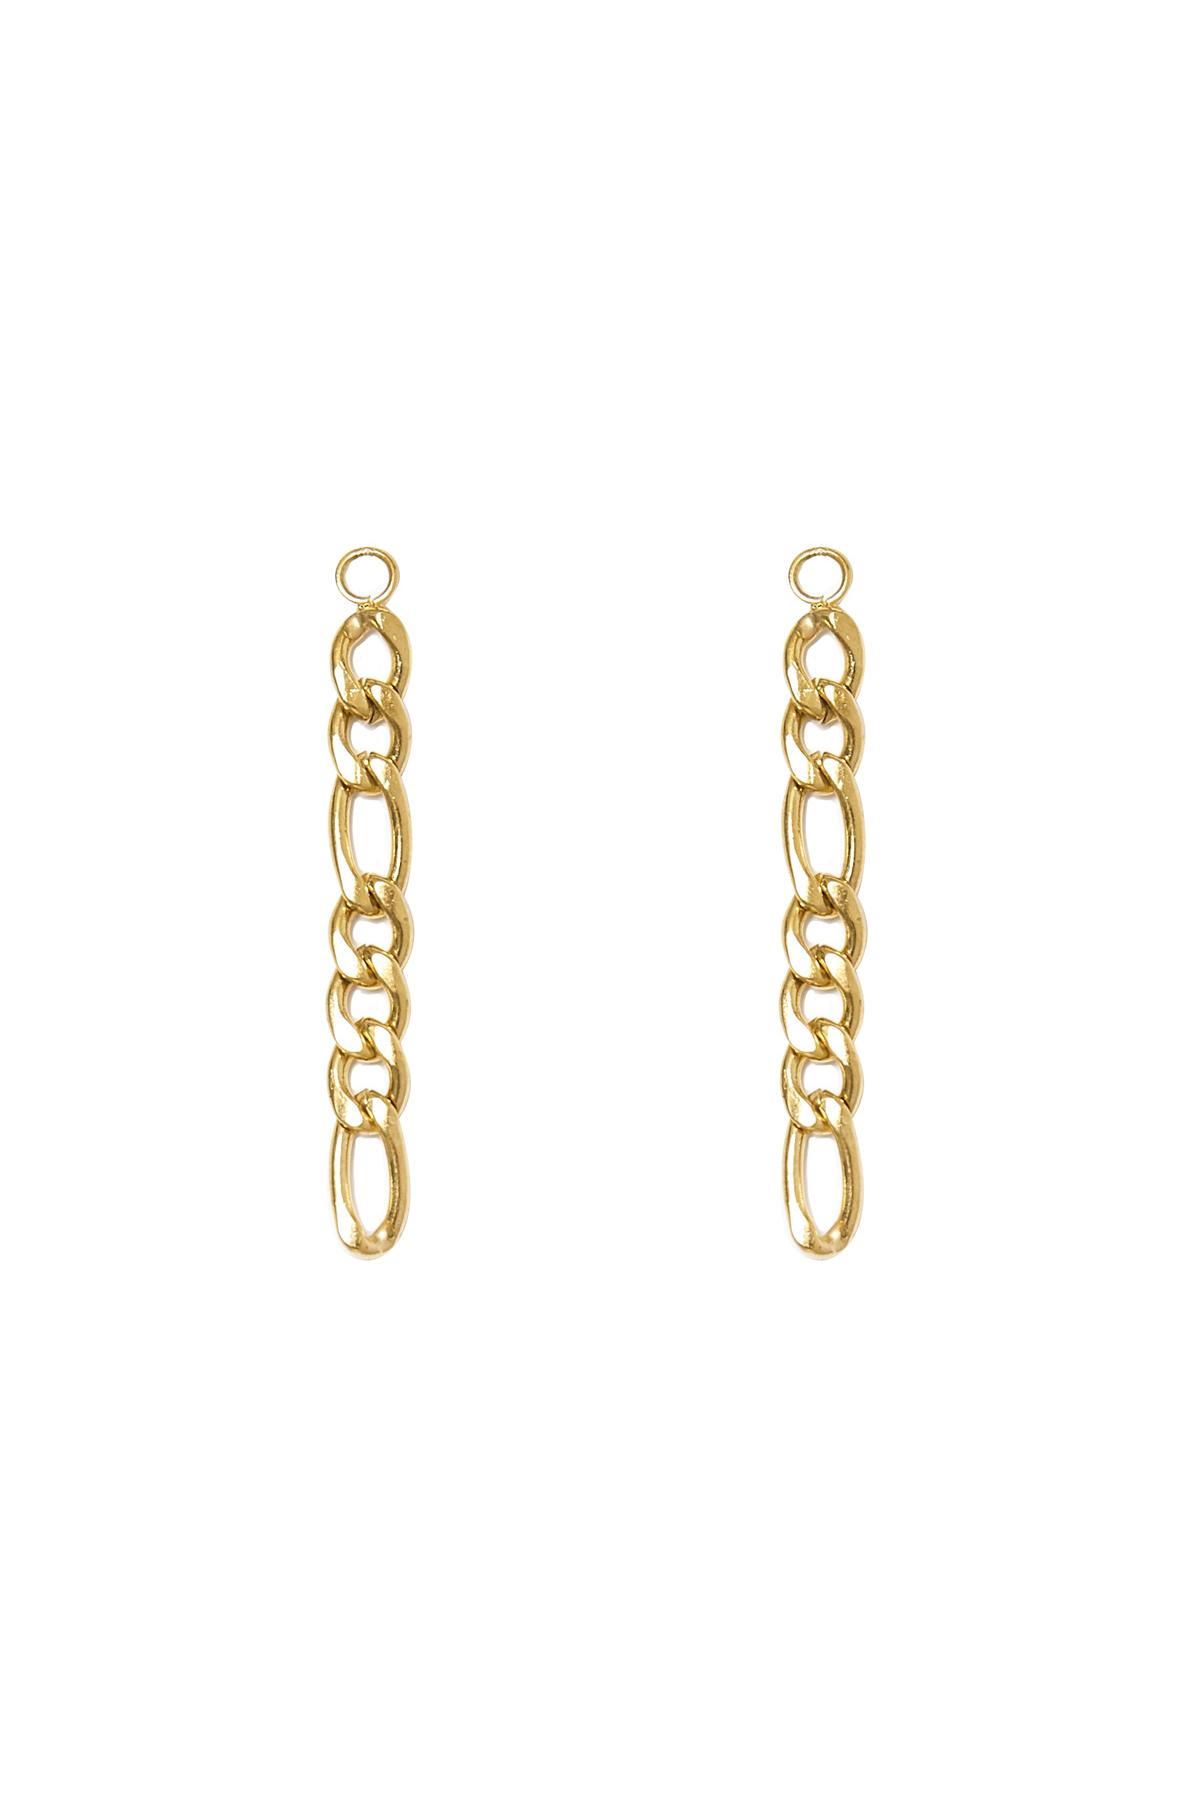 Ear Chain Creation 2 Gold Stainless Steel h5 